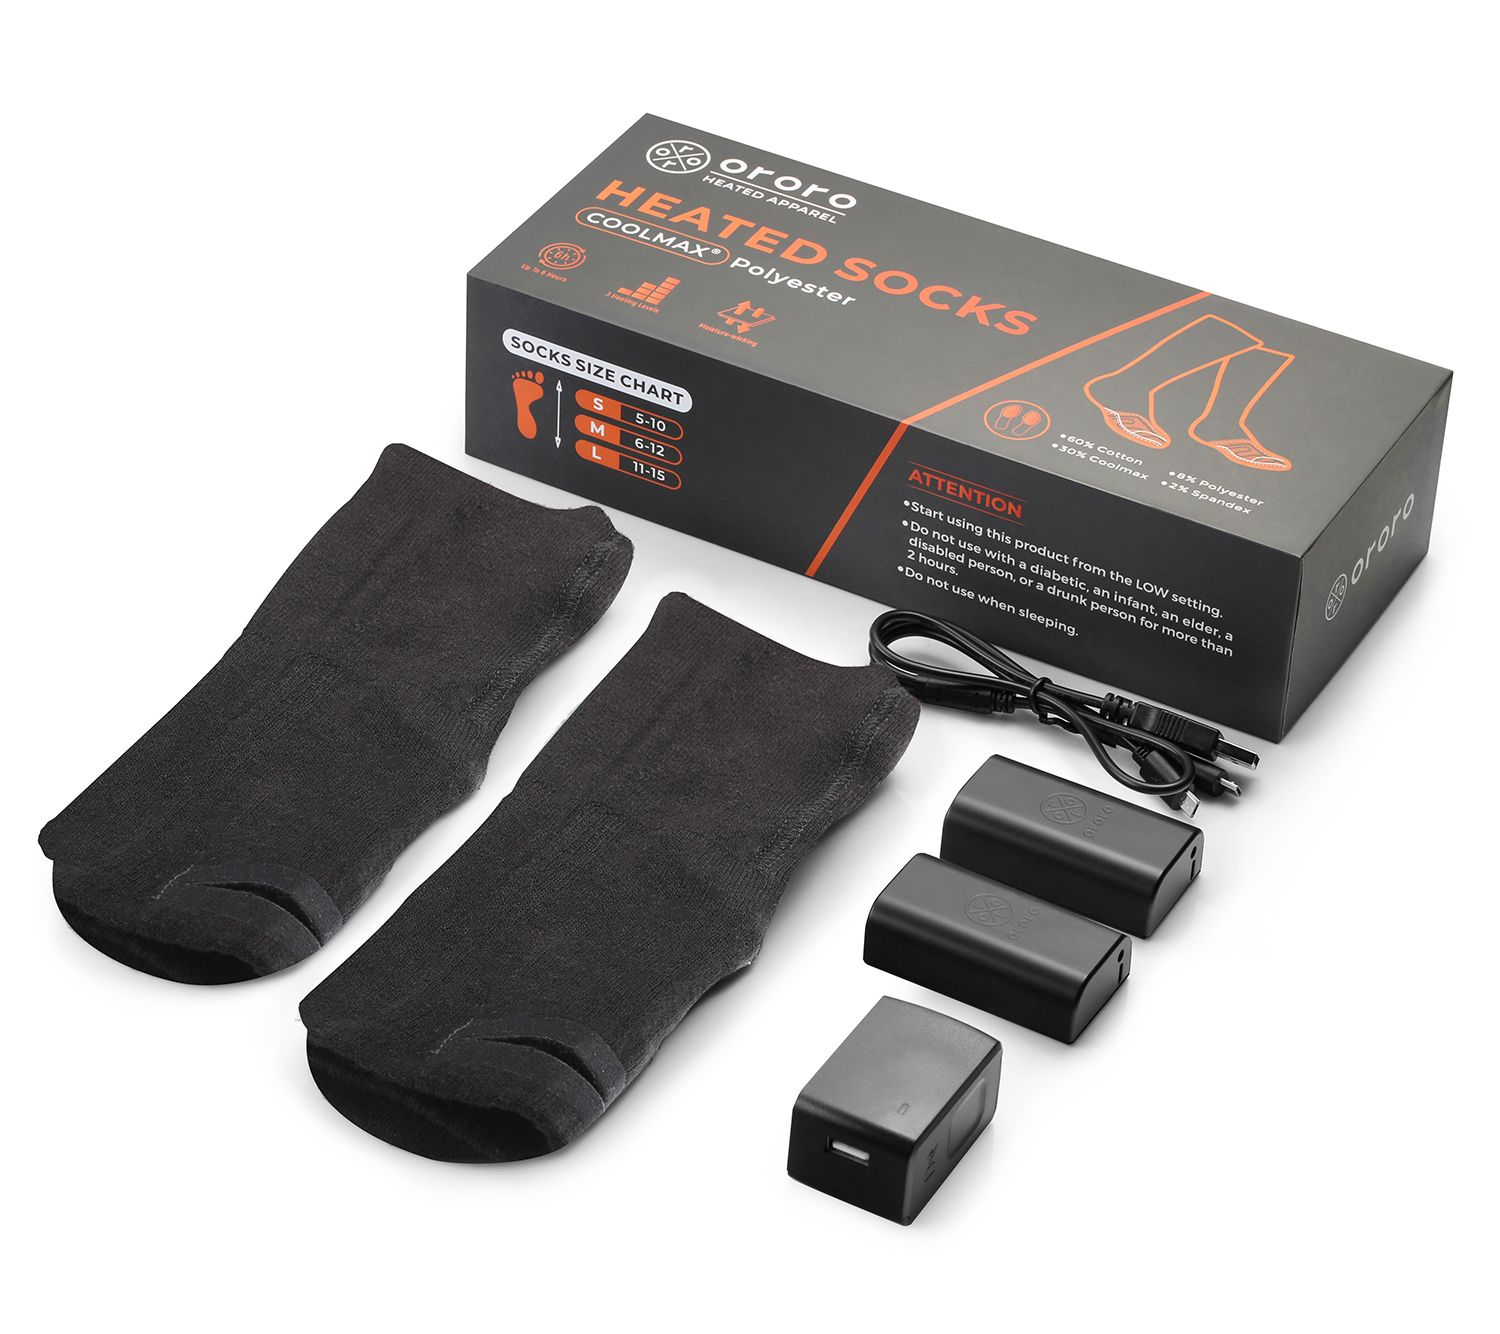 ORORO Unisex Heated Socks with RechargeableBattery - QVC.com